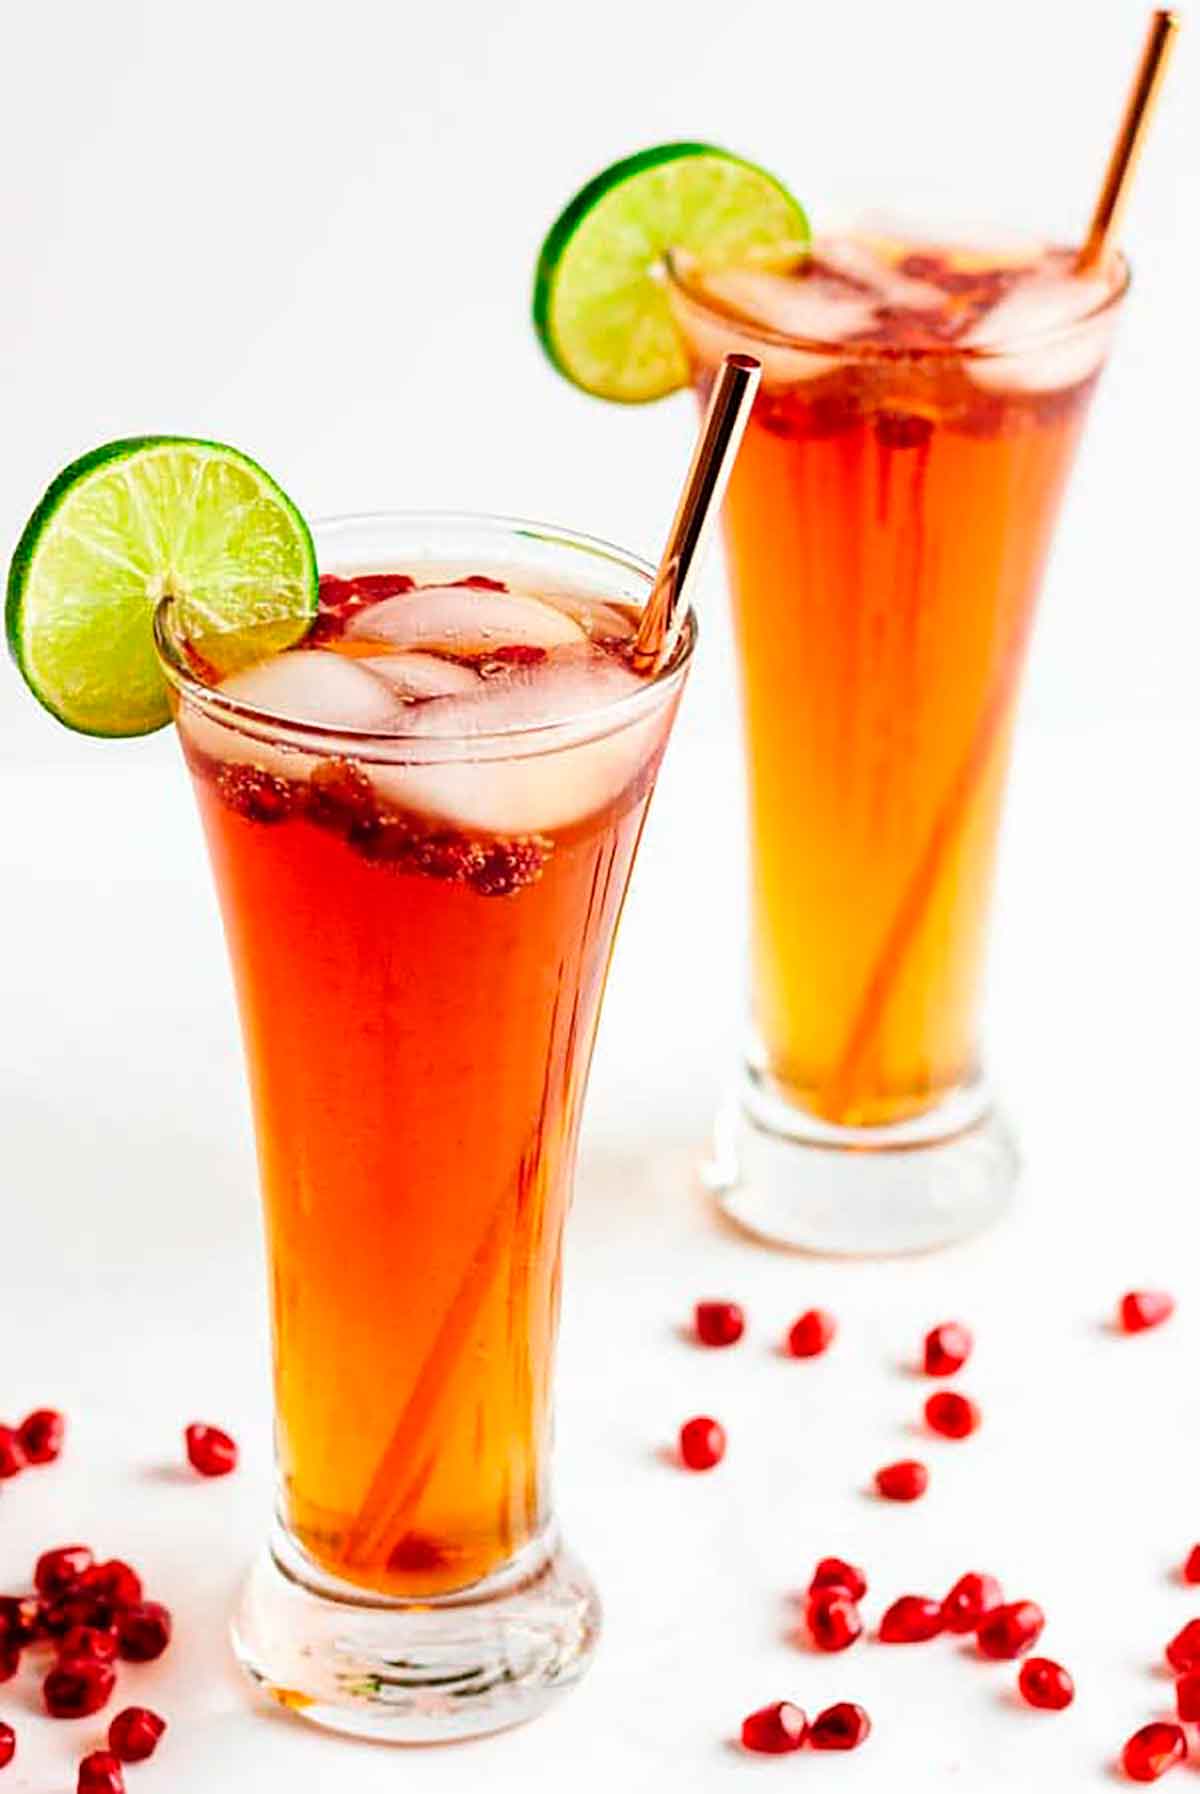 2 pomegranate lime spritzer cocktails, garnished with pomegranate seeds and lime slices.